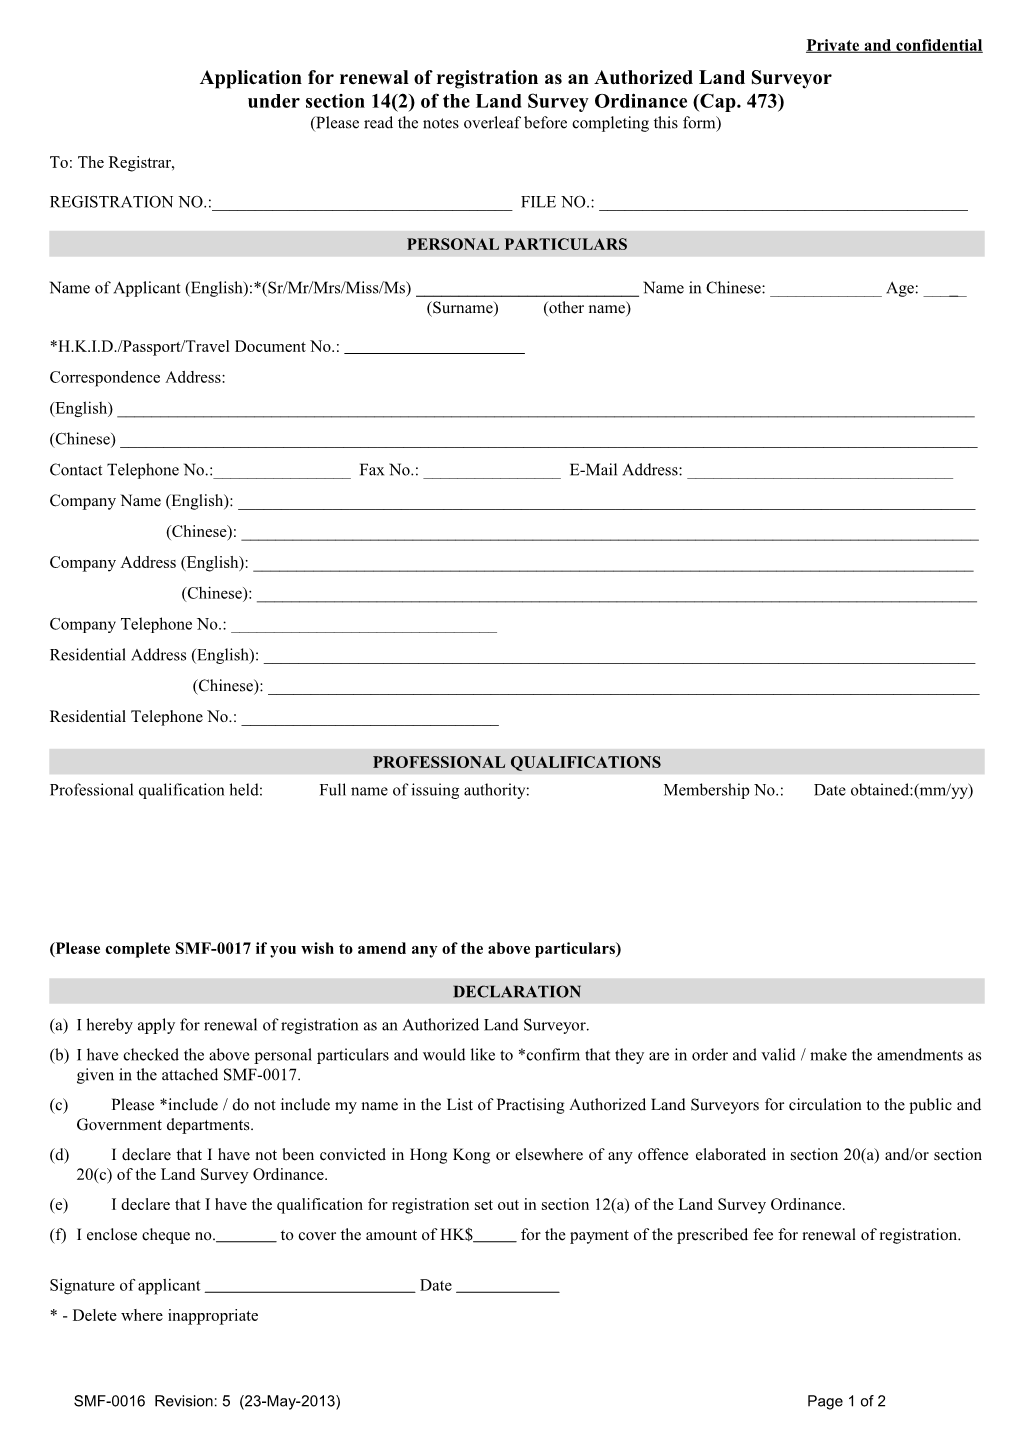 Application for Renewal of Registration As an Authorized Land Surveyor